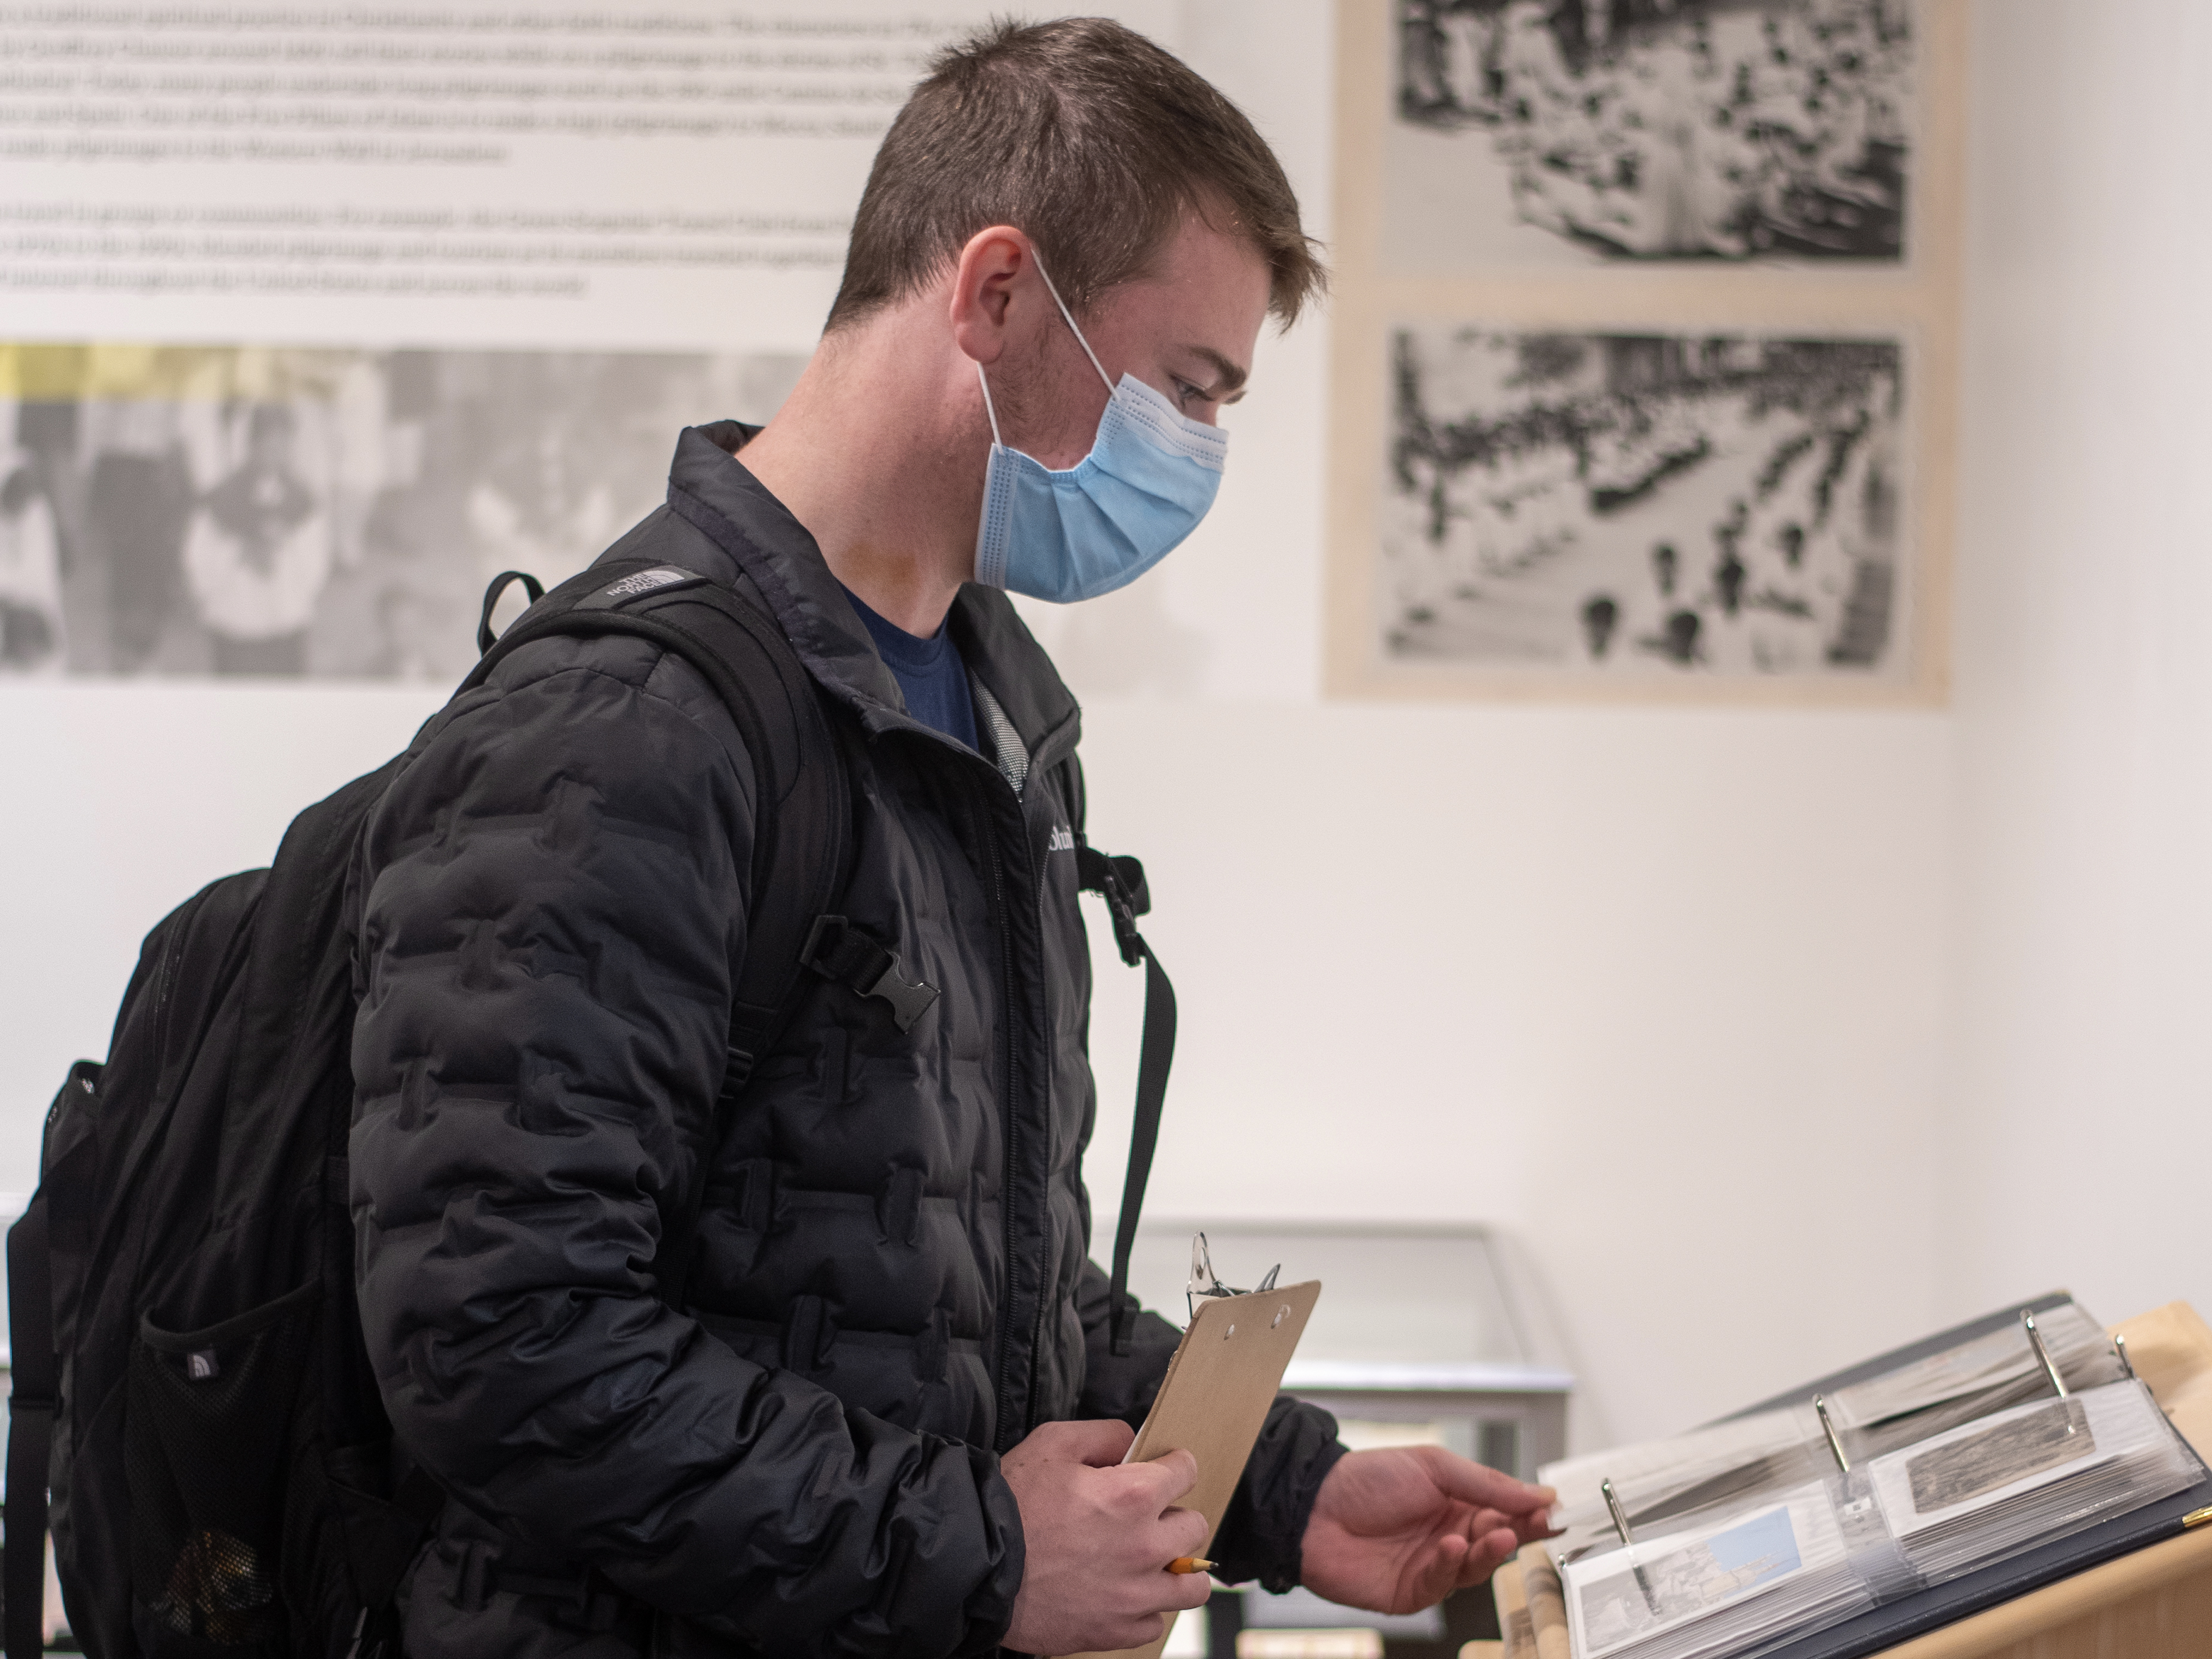 student looks at Marian library exhibit